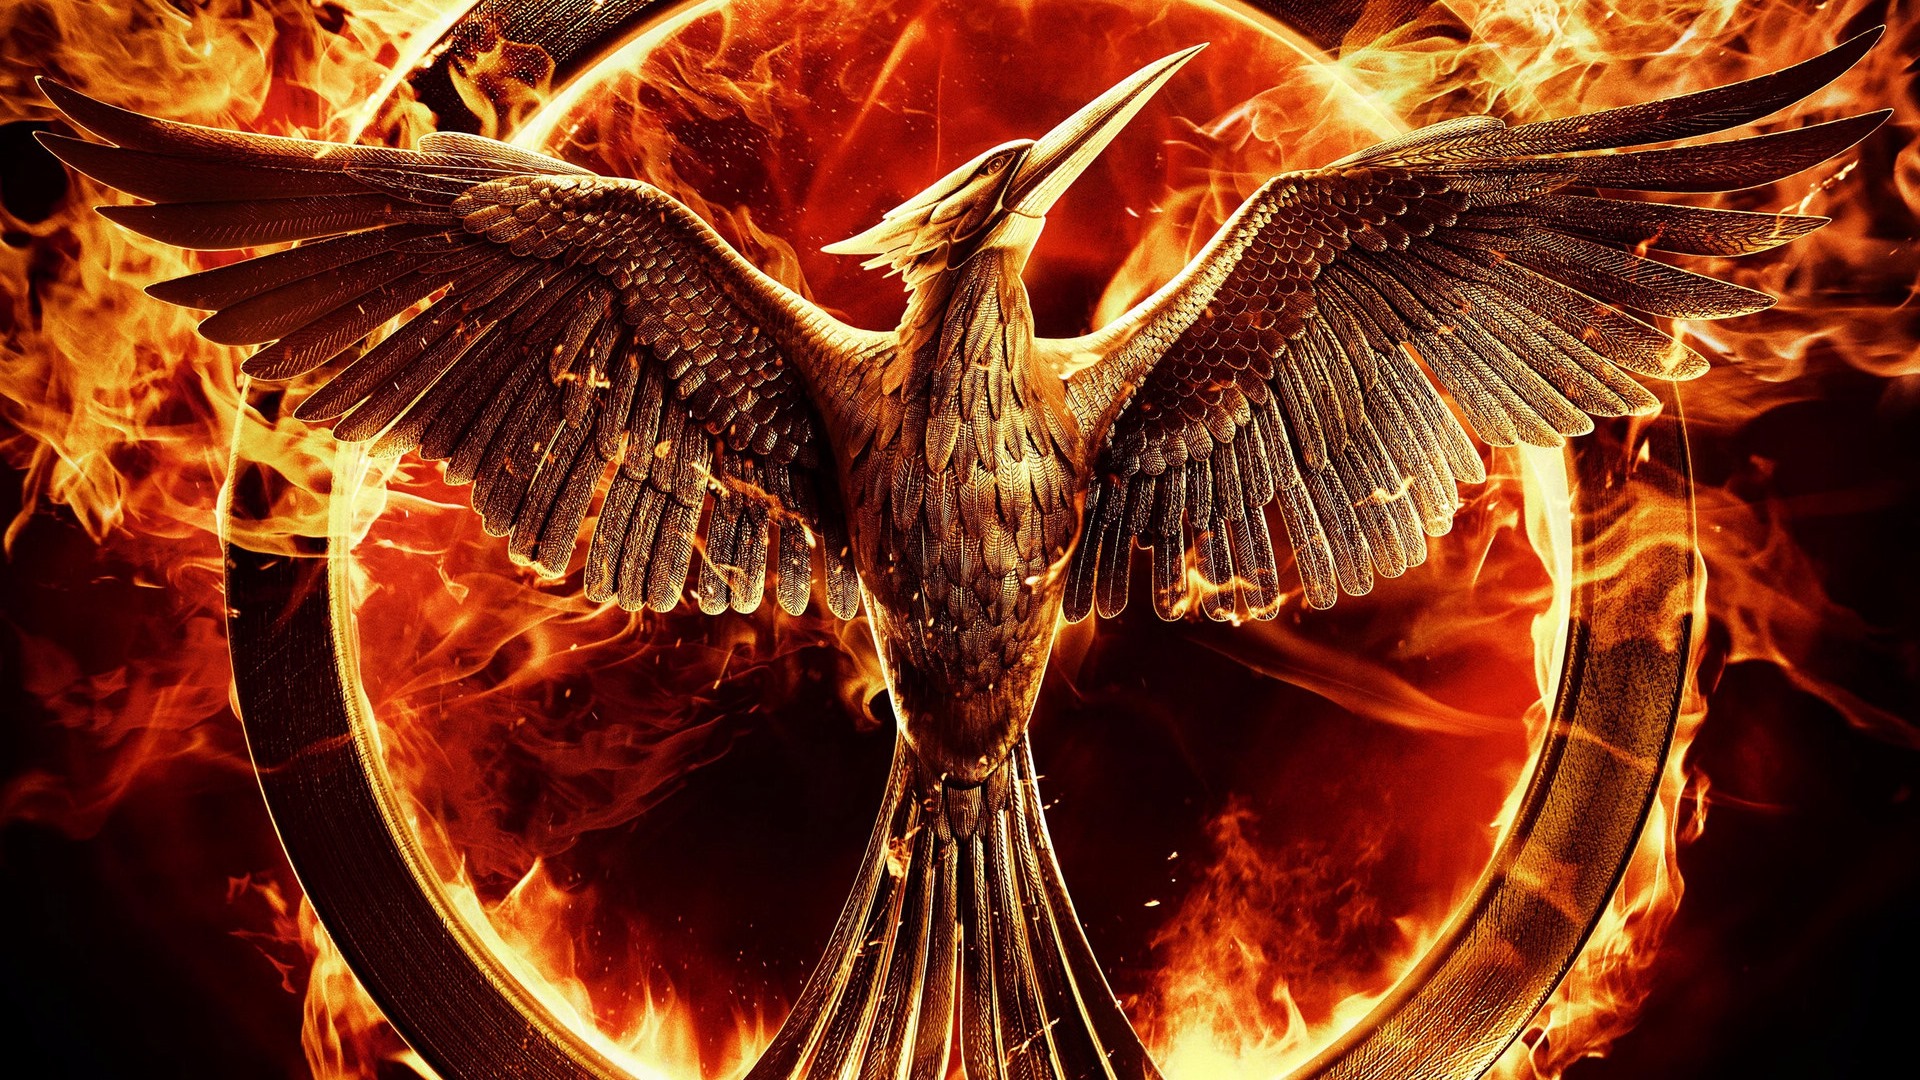 The Hunger Games: Mockingjay HD wallpapers #4 - 1920x1080